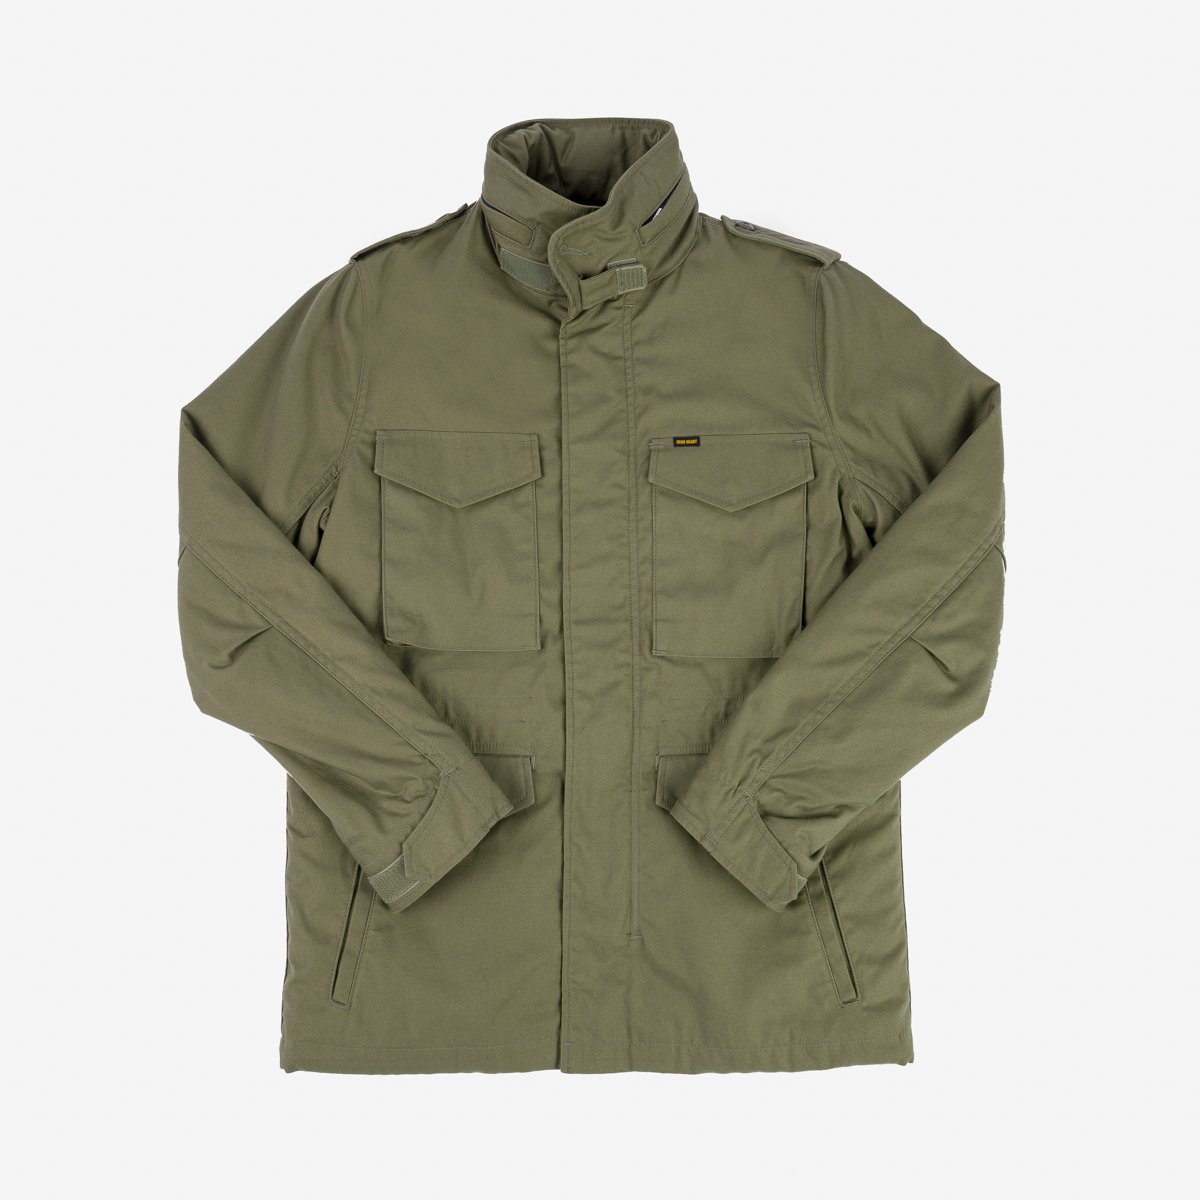 Iron Heart IHM-41-GRN Quilted Lining M65 Field Jacket - Olive Drab Green